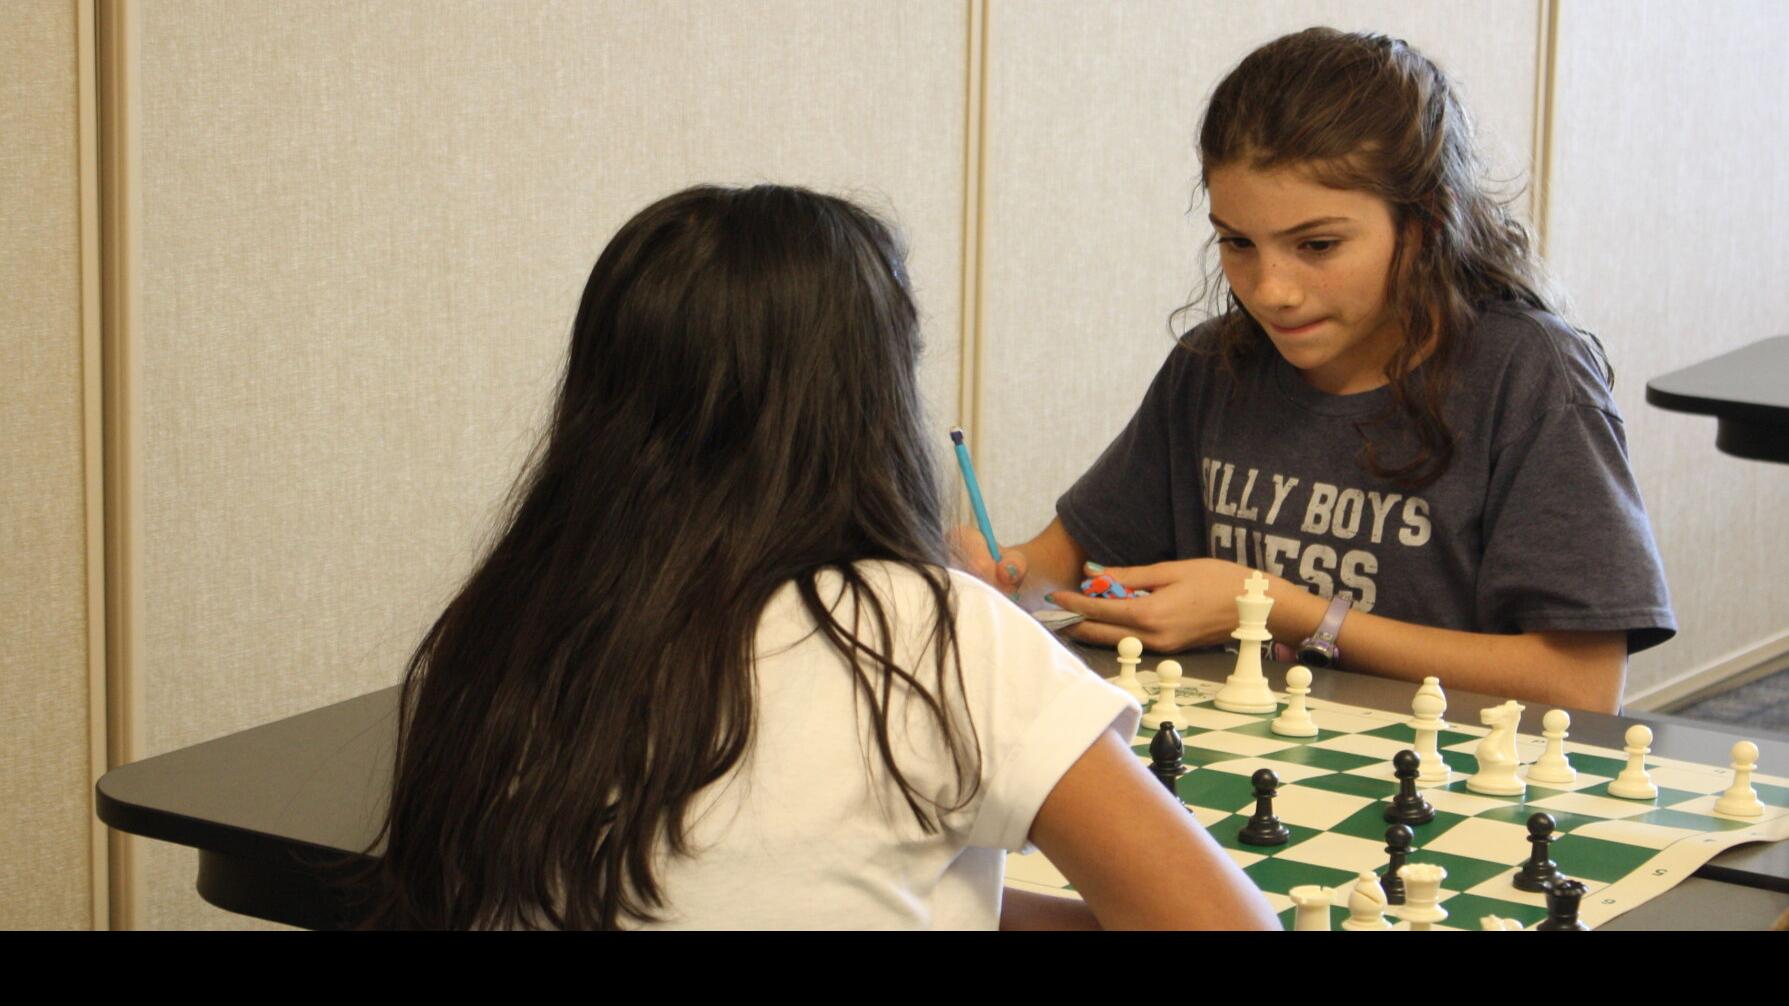 Chess without a queen: beyond COVID-19 - Blog